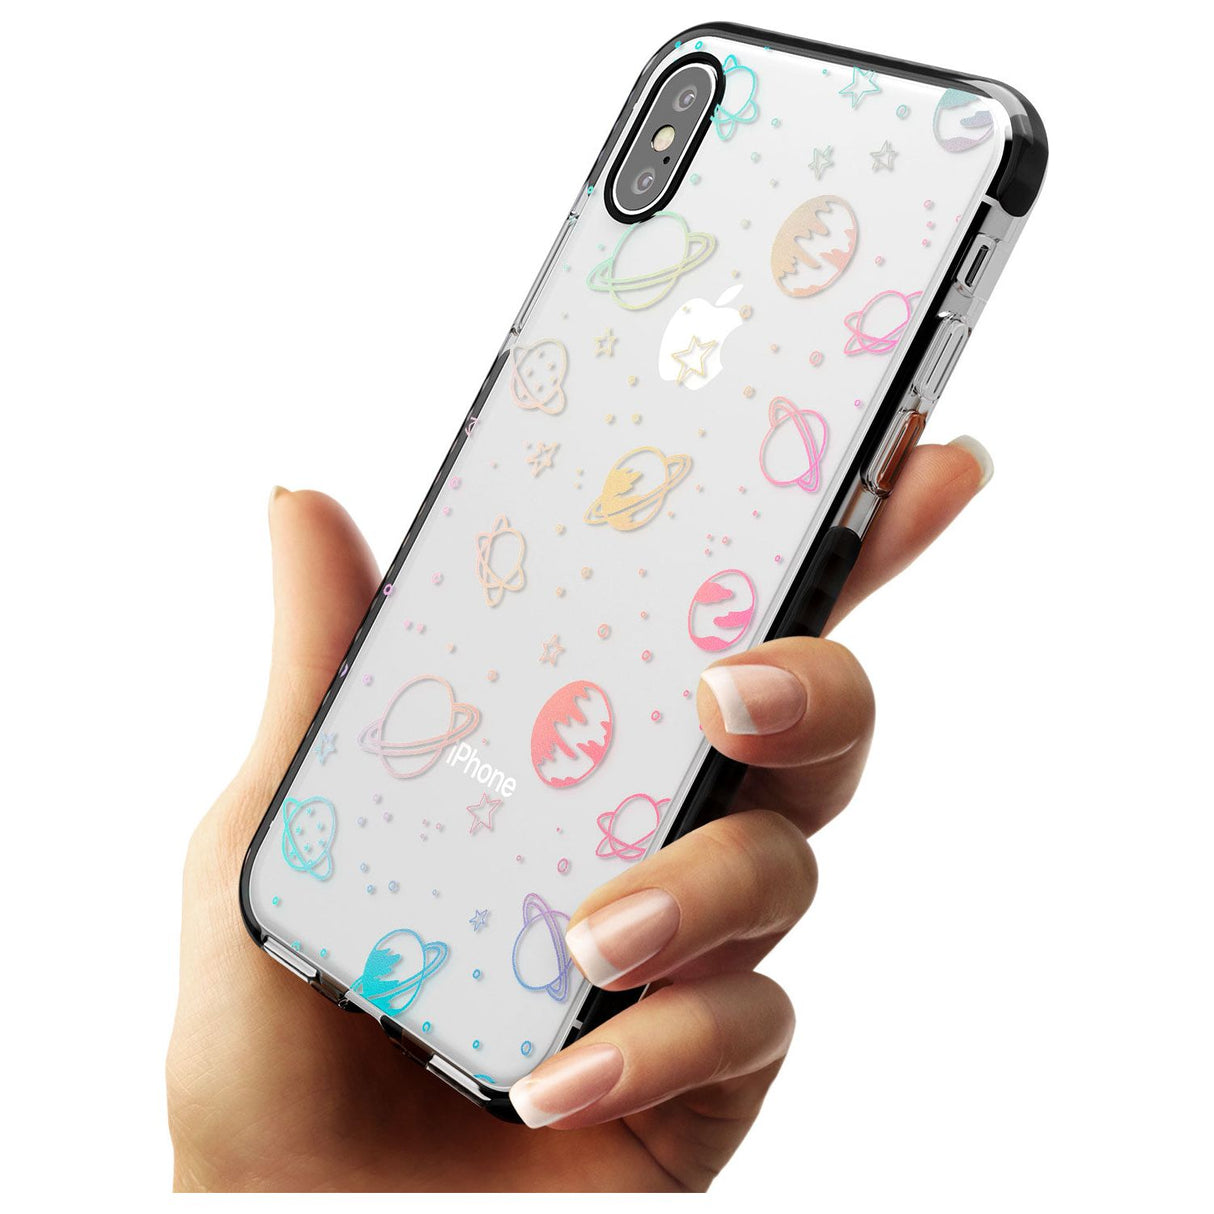 Outer Space Outlines: Pastels on Clear Pink Fade Impact Phone Case for iPhone X XS Max XR